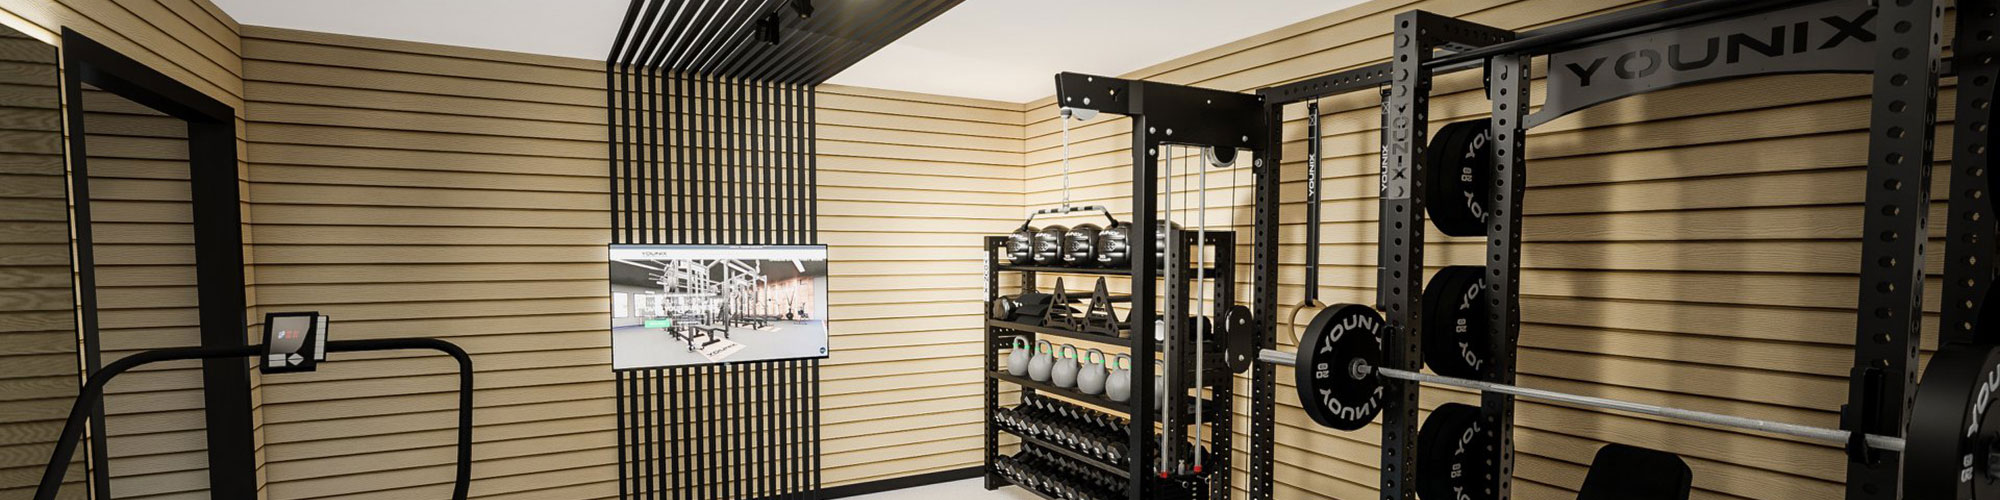 Gym design and fitness equipment from CYC Fitness